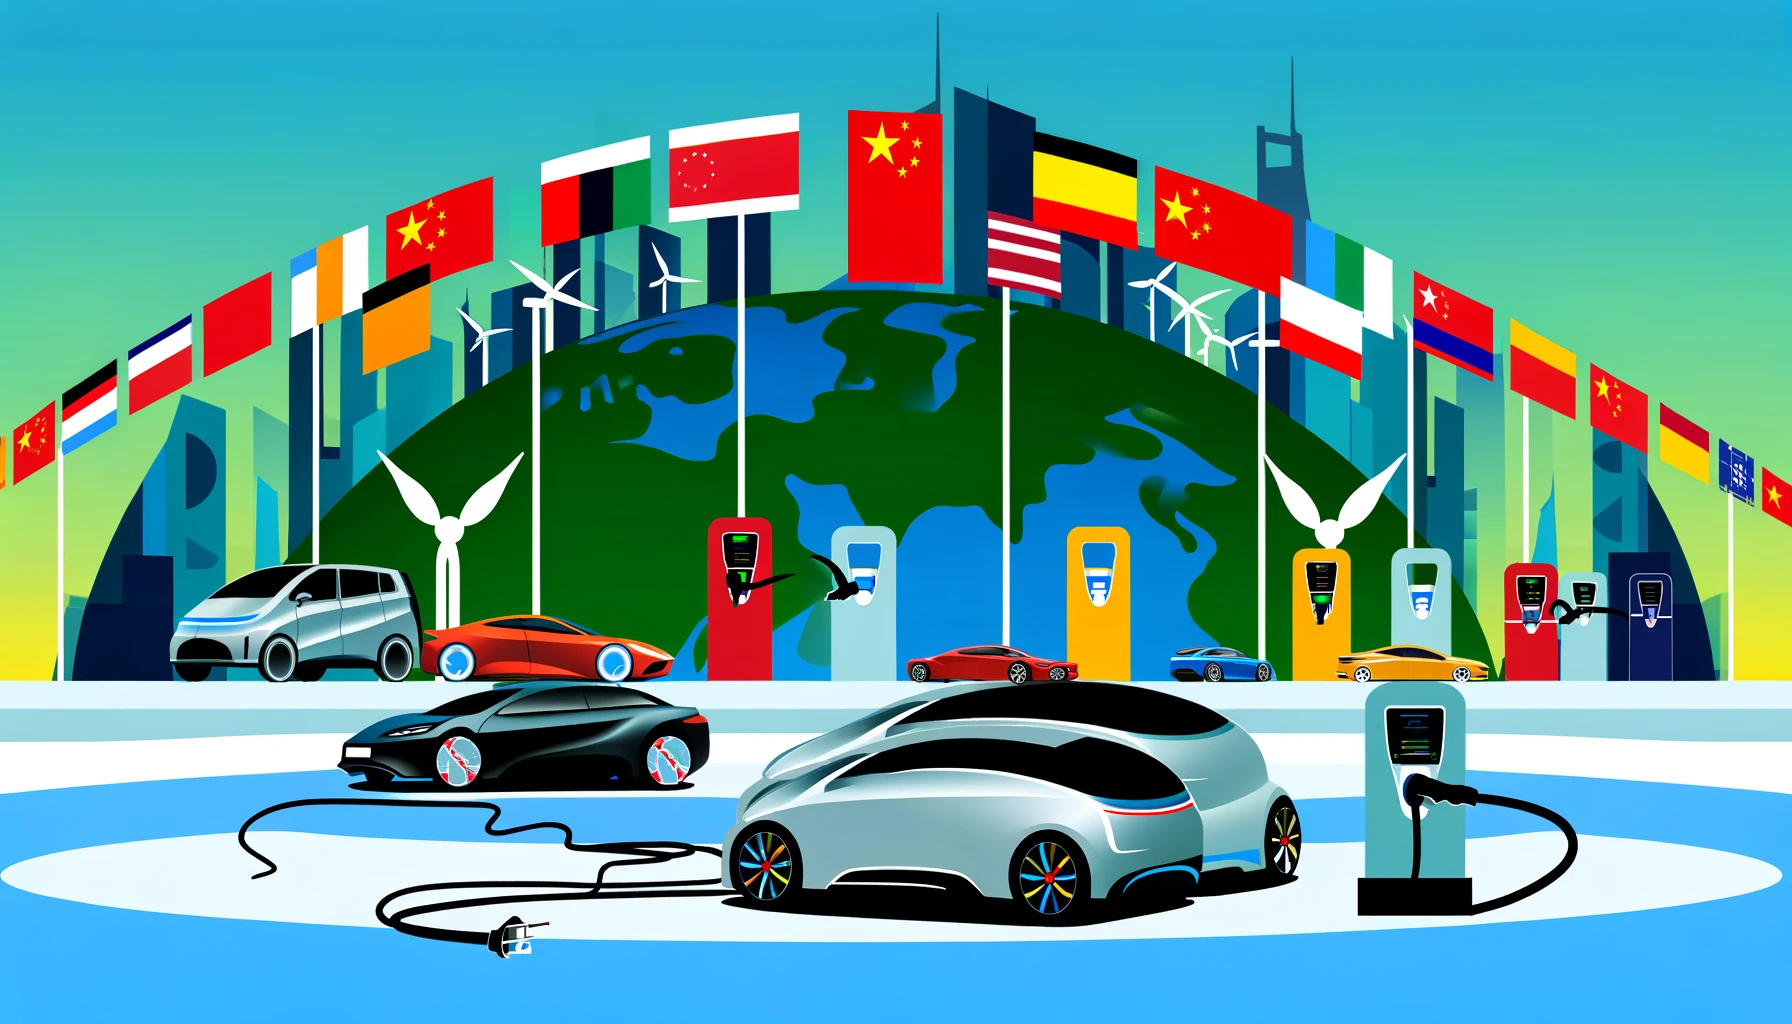 China's car market, a competitive battleground, is central to the worldwide electric vehicle revolution.